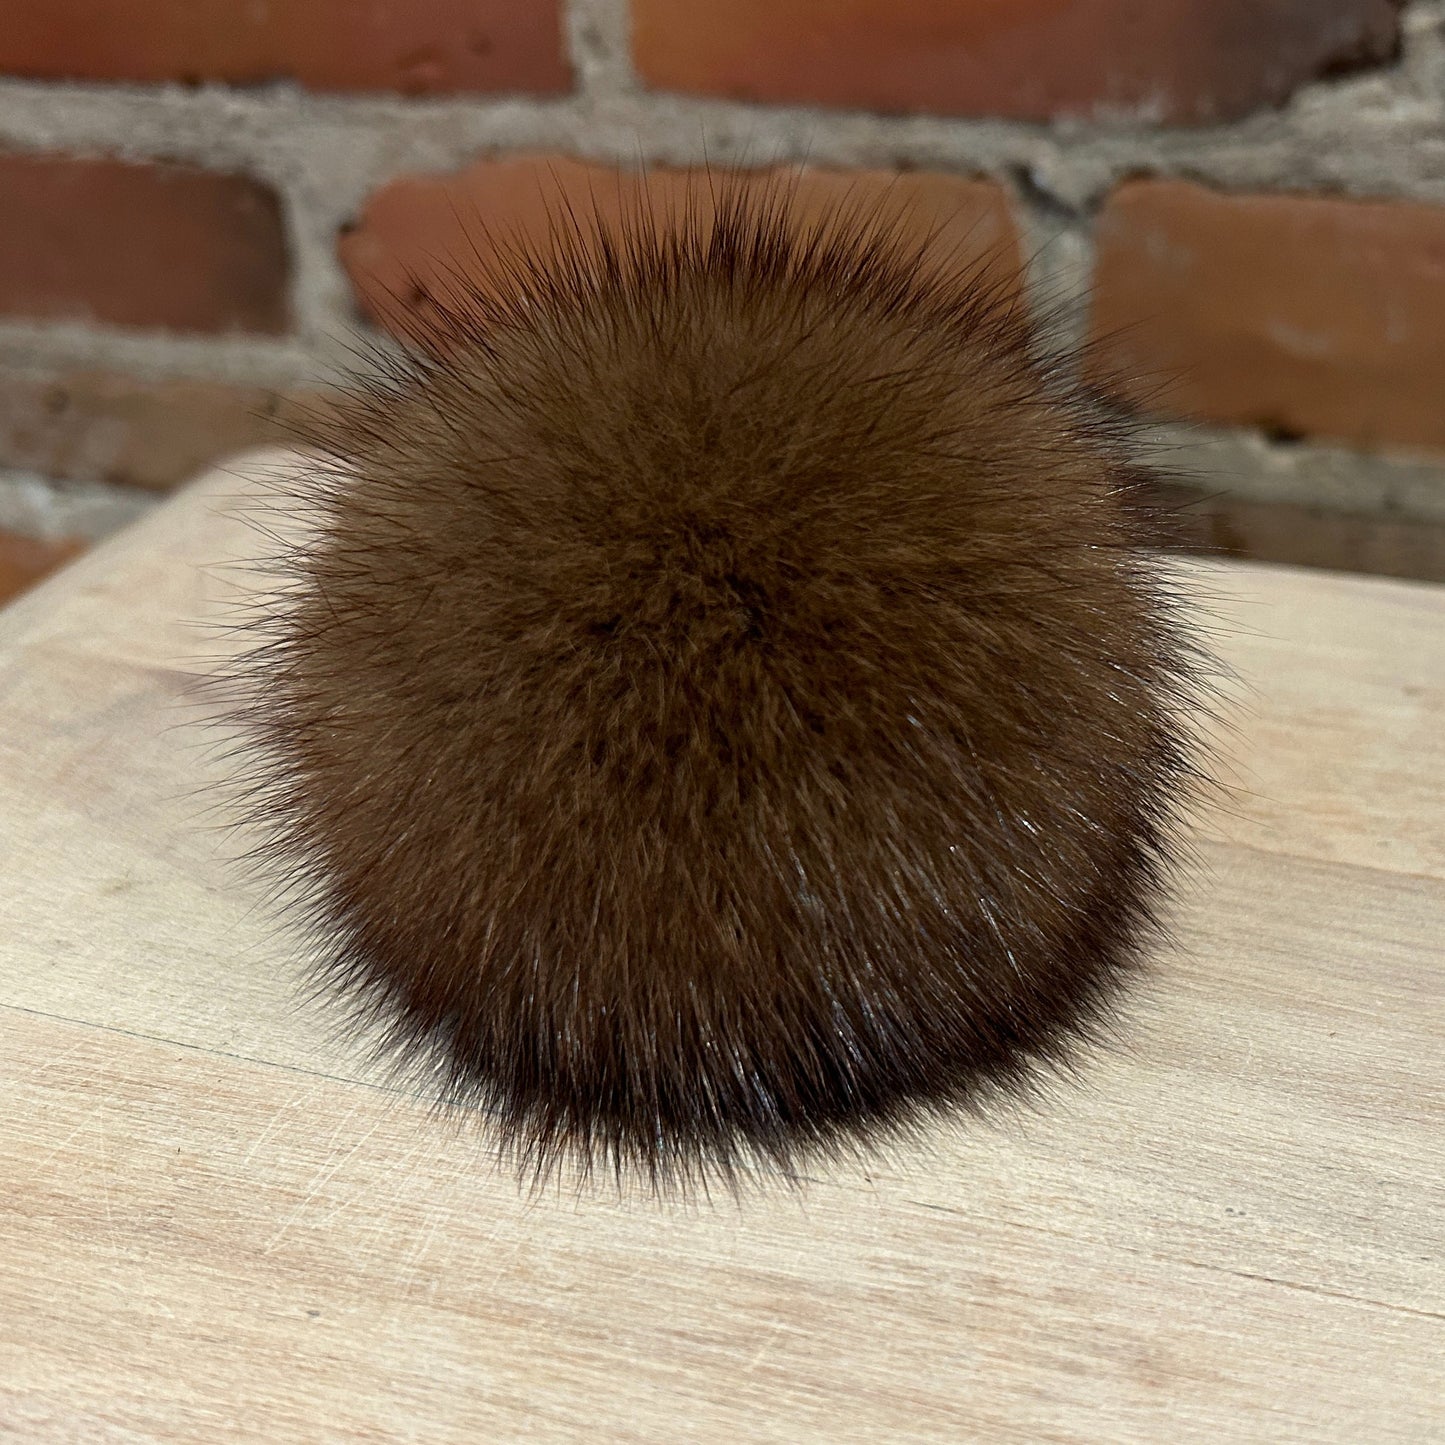 Brown Sable Marten Pom Pom for Baby's Knit Hat